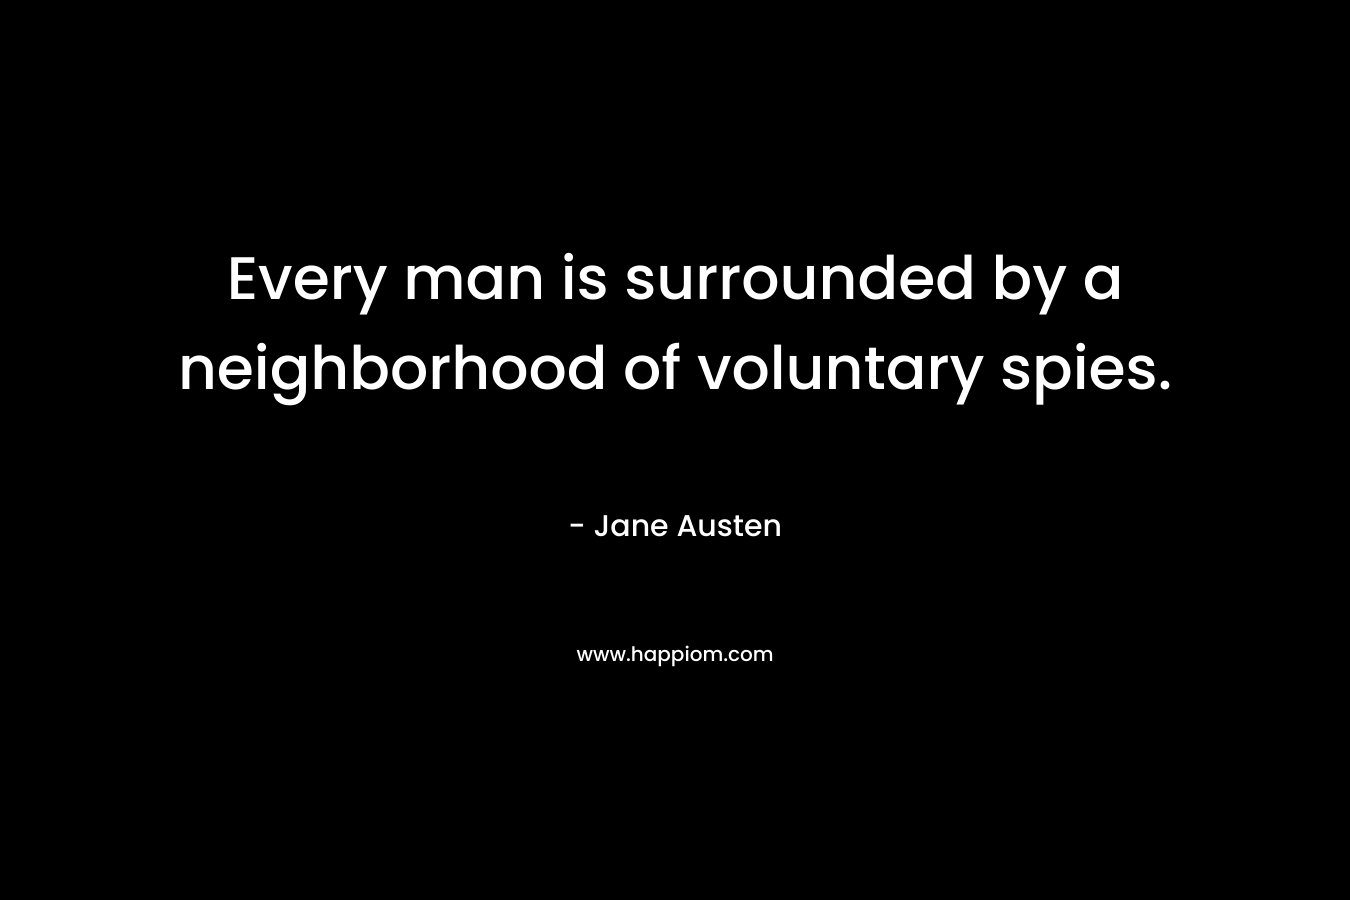 Every man is surrounded by a neighborhood of voluntary spies. – Jane Austen